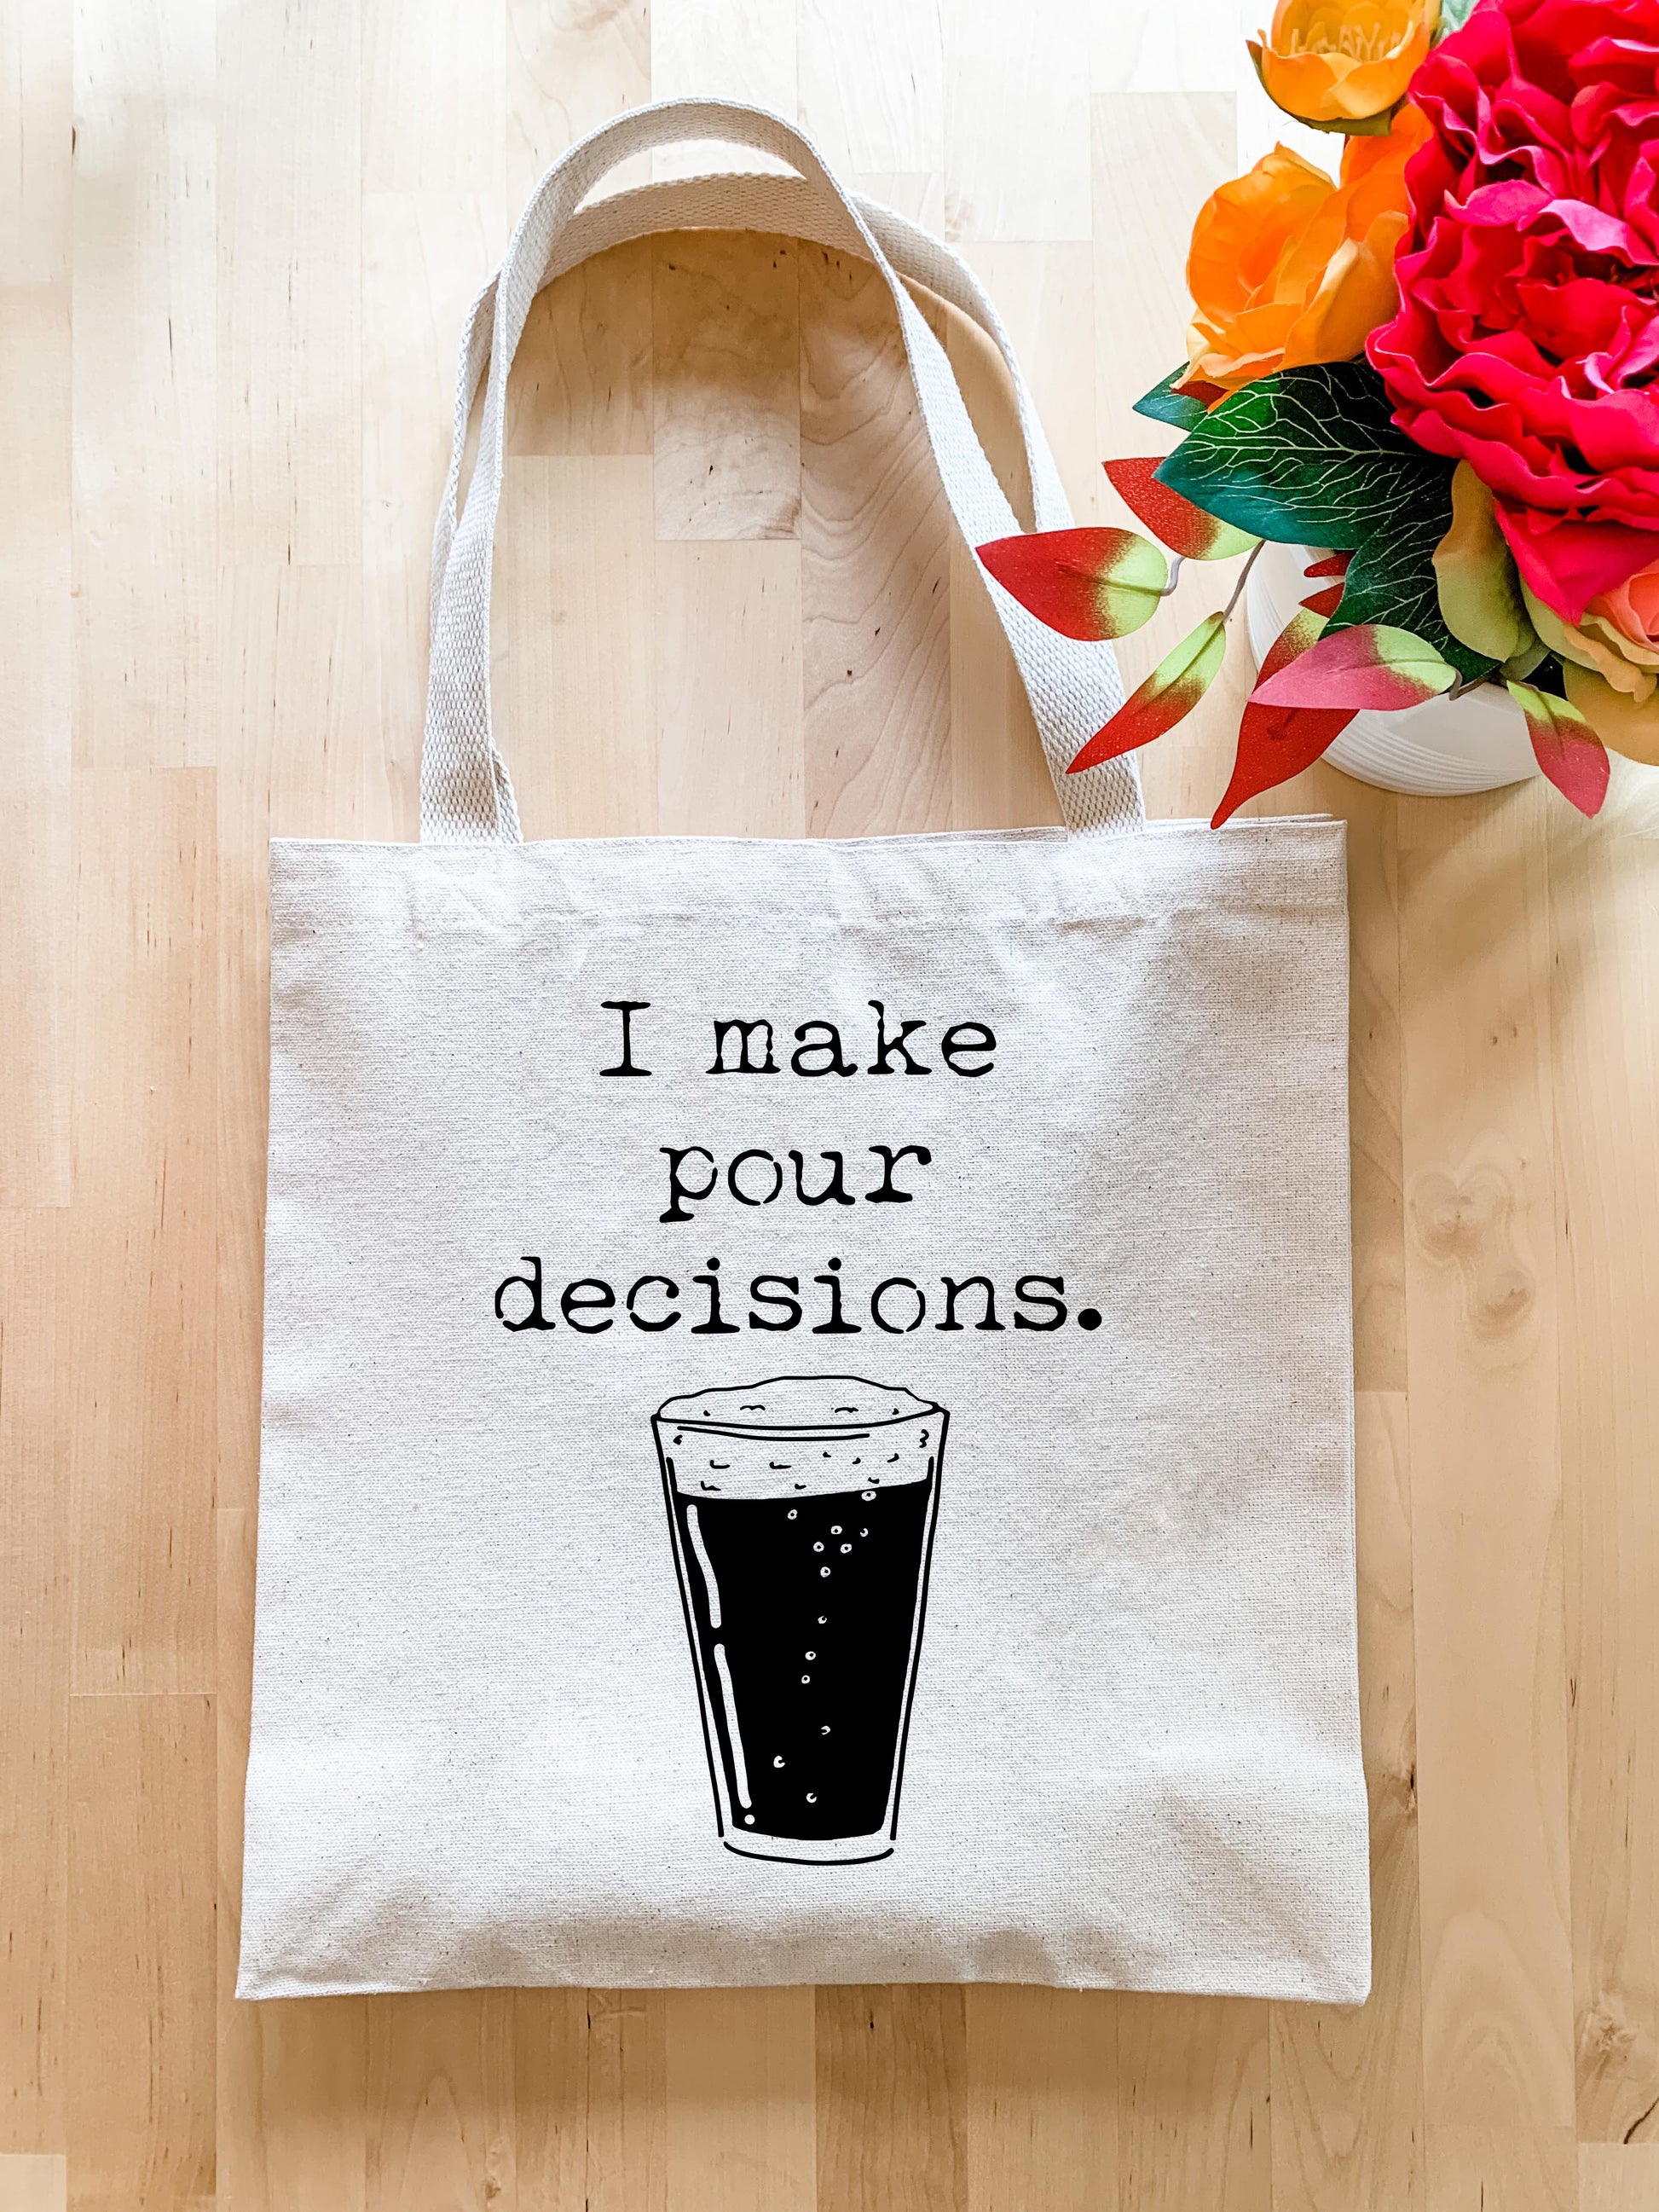 I Make Pour Decisions - Tote Bag - MoonlightMakers